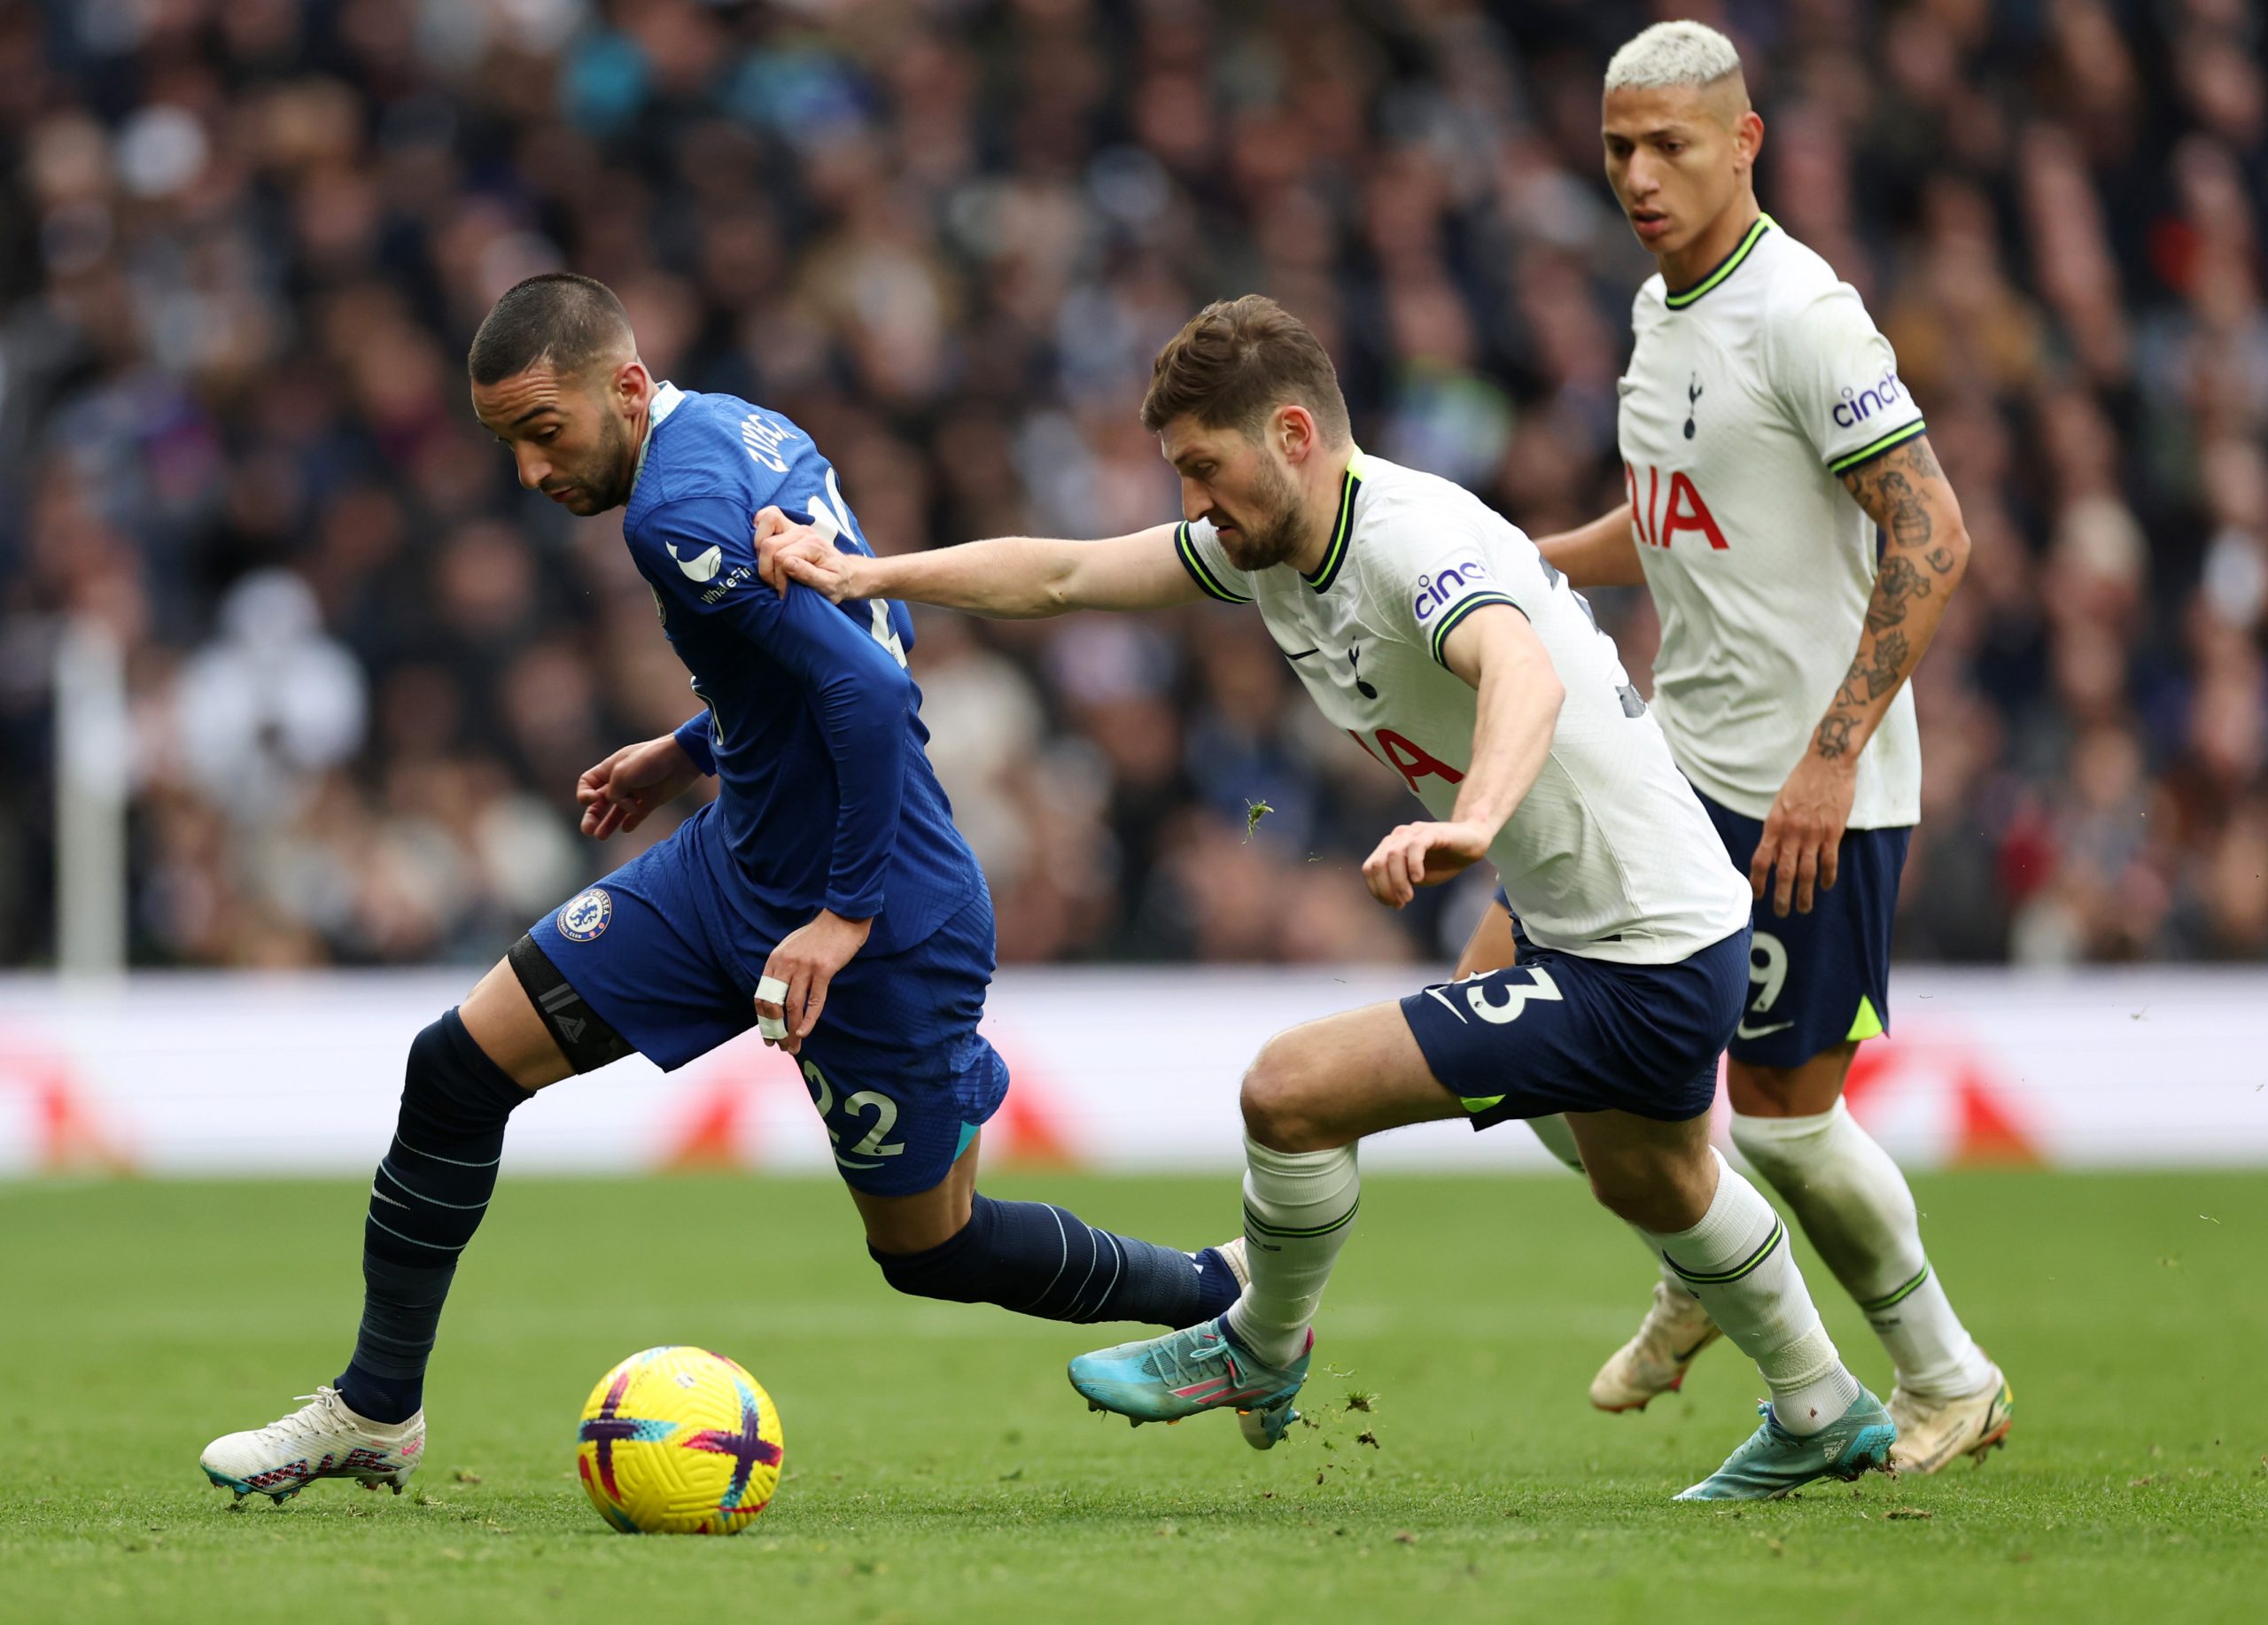 Hakim Ziyech of Chelsea is tackled by Ben Davies of Tottenham Hotspur. (Photo by Catherine Ivill/Getty Images)